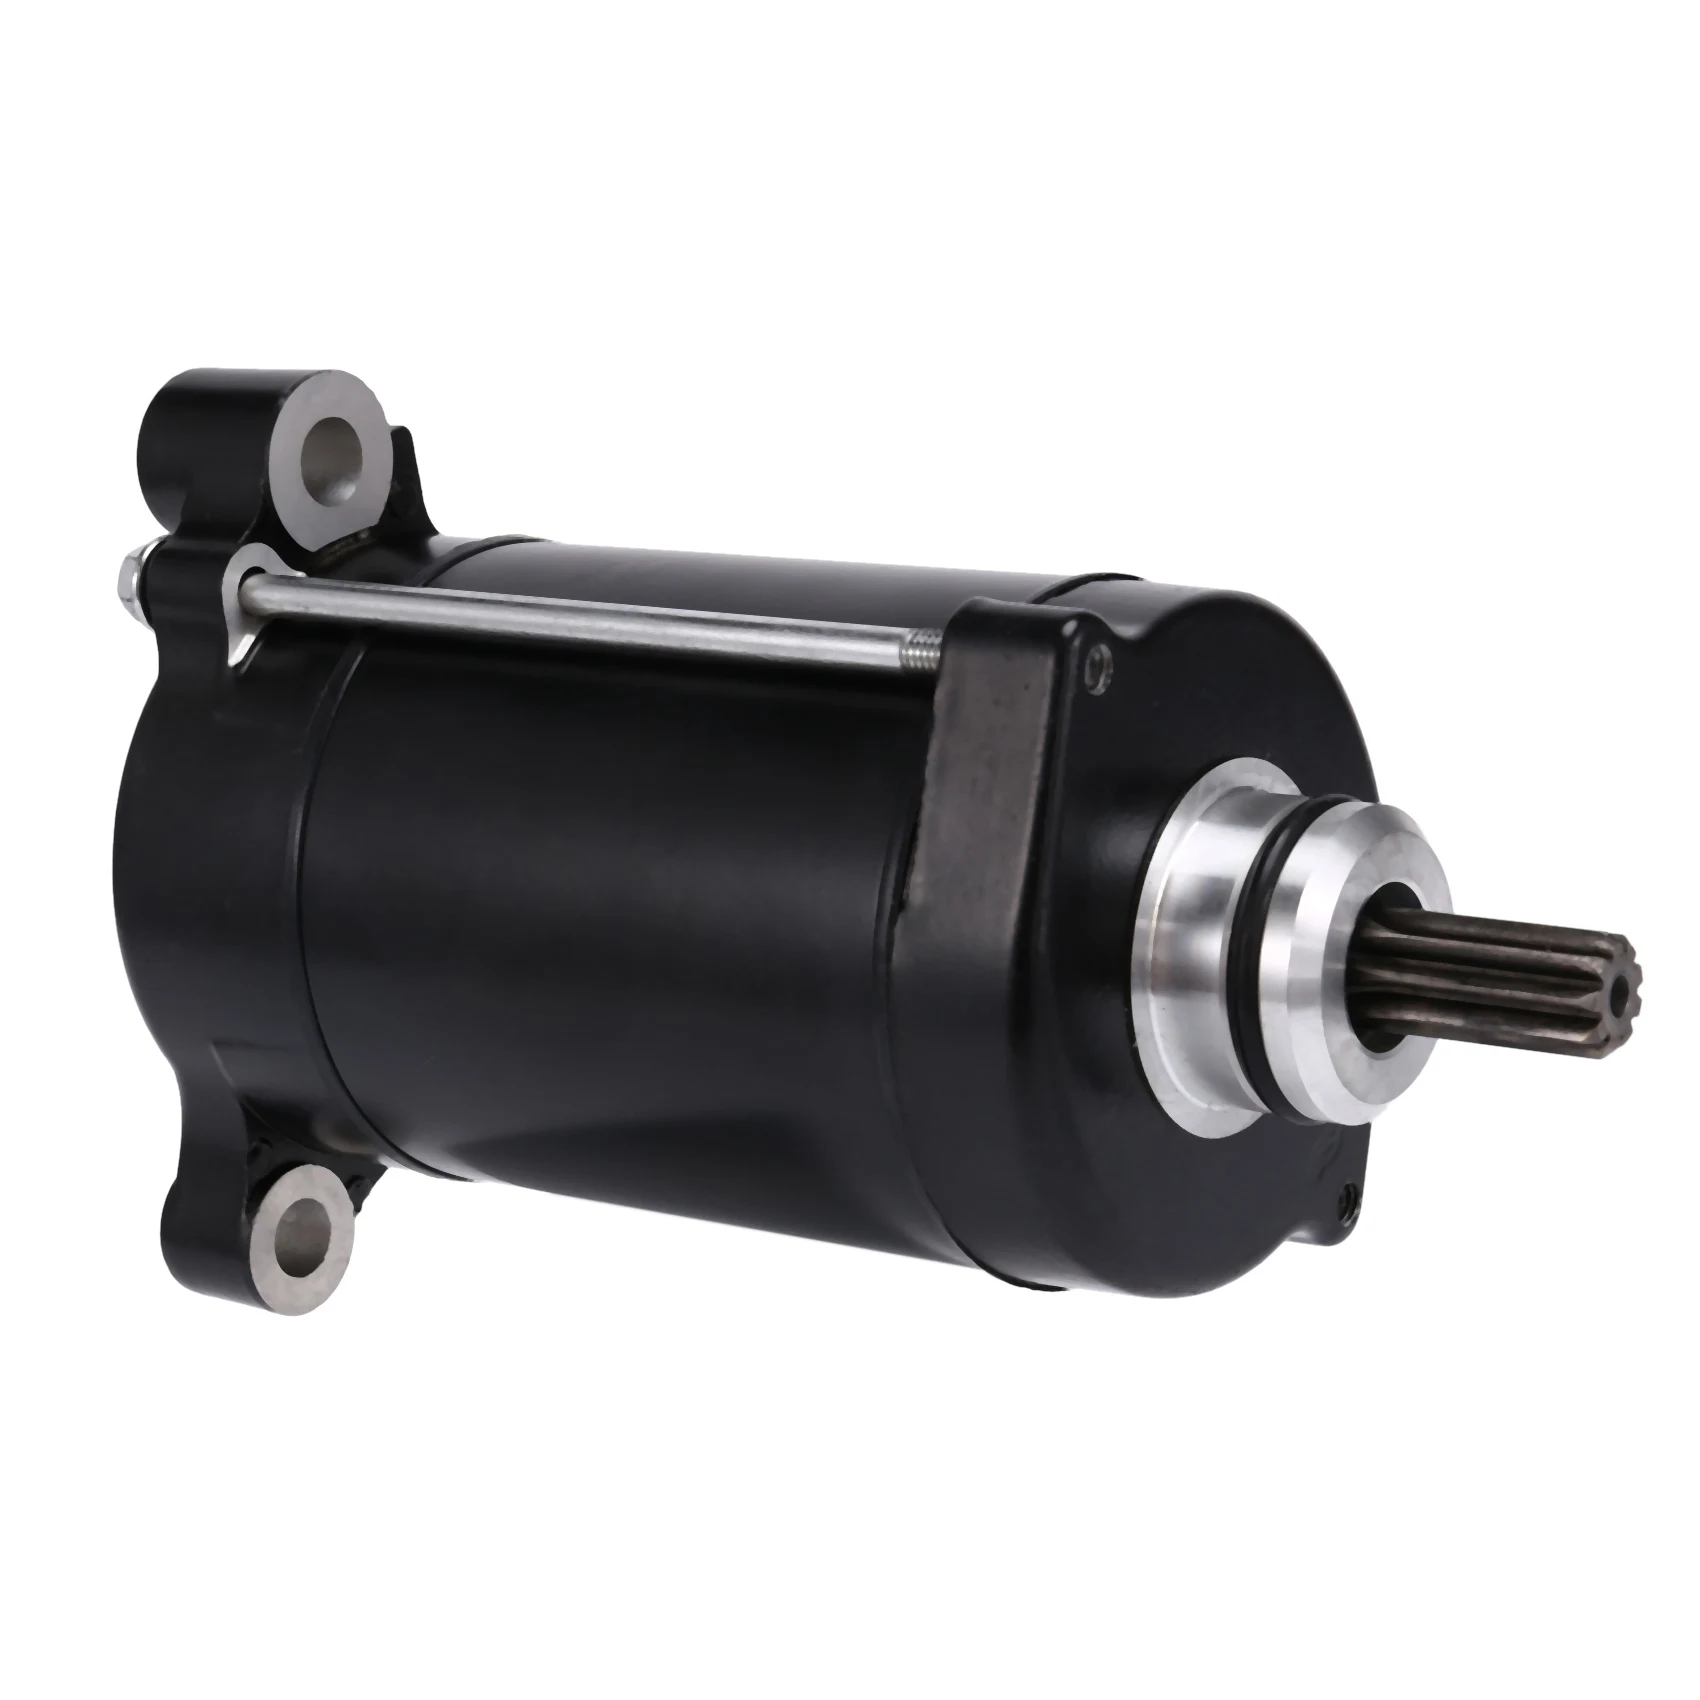 

12V Motorcycle Starting Motor Assy for Yamaha 6D3-81800-00-00 Ccw Pmdd